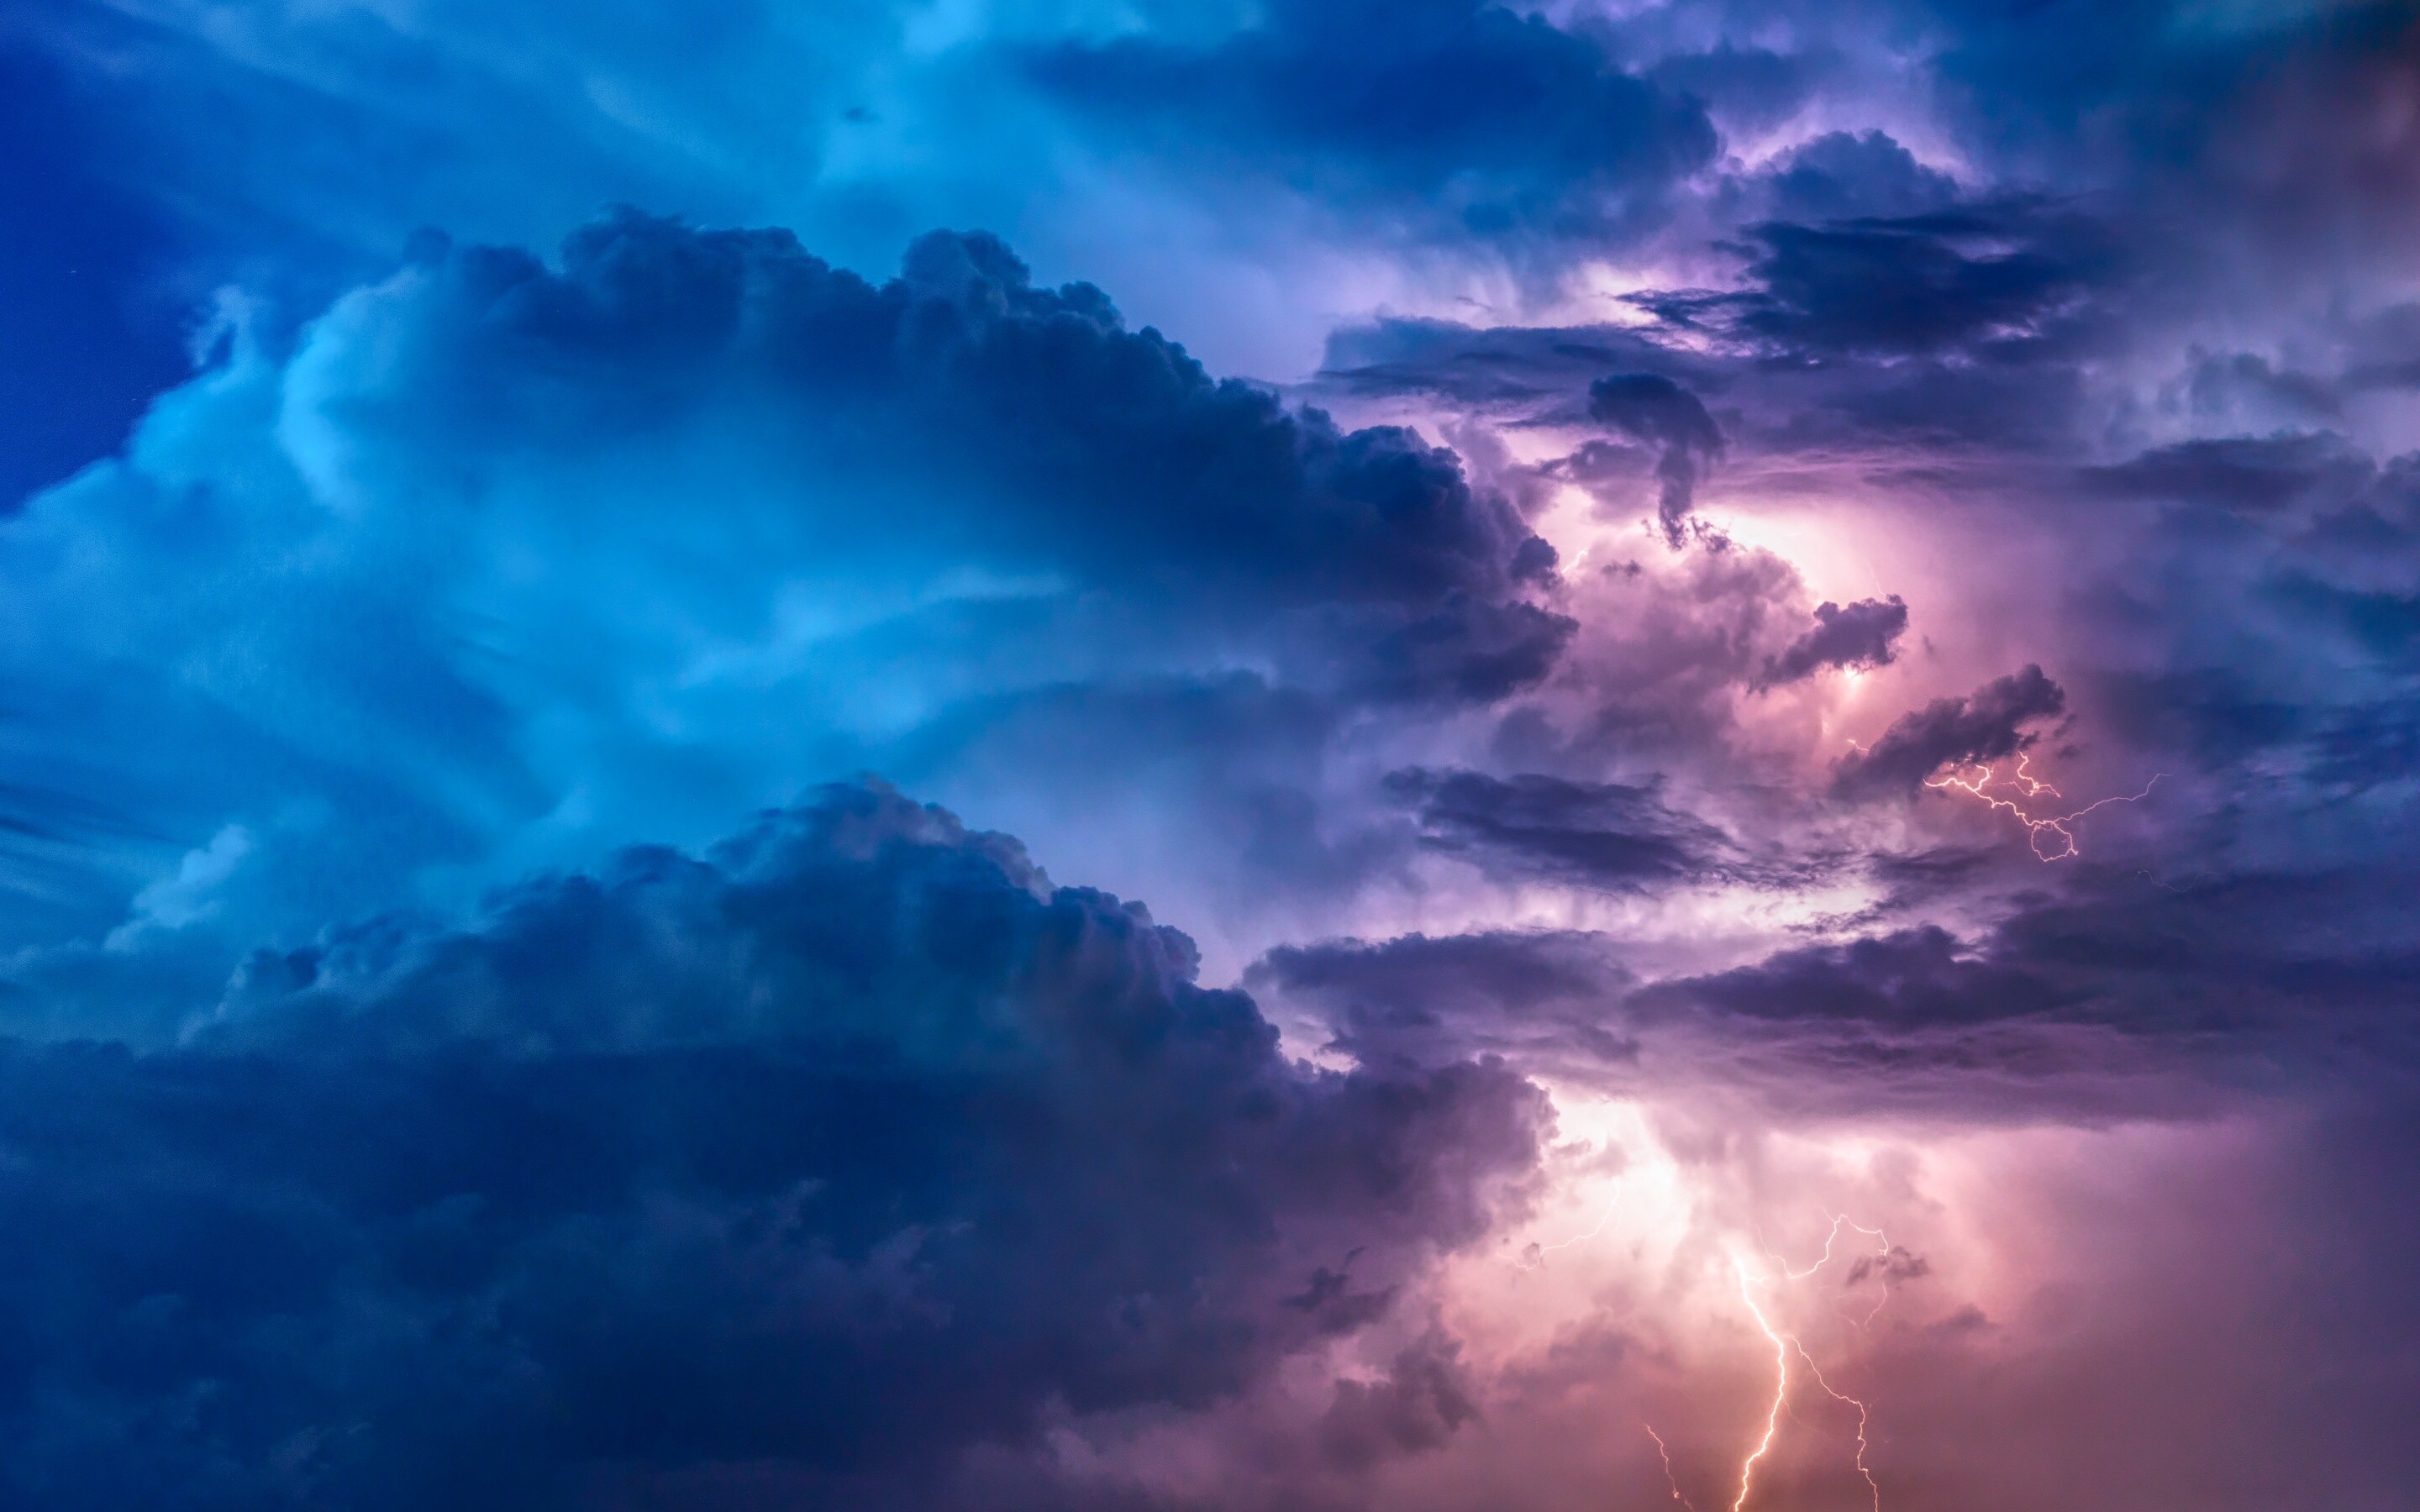 Thunderstorm in 4K, Flashing lightning, Stormy clouds, Captivating nature, 2880x1800 HD Desktop